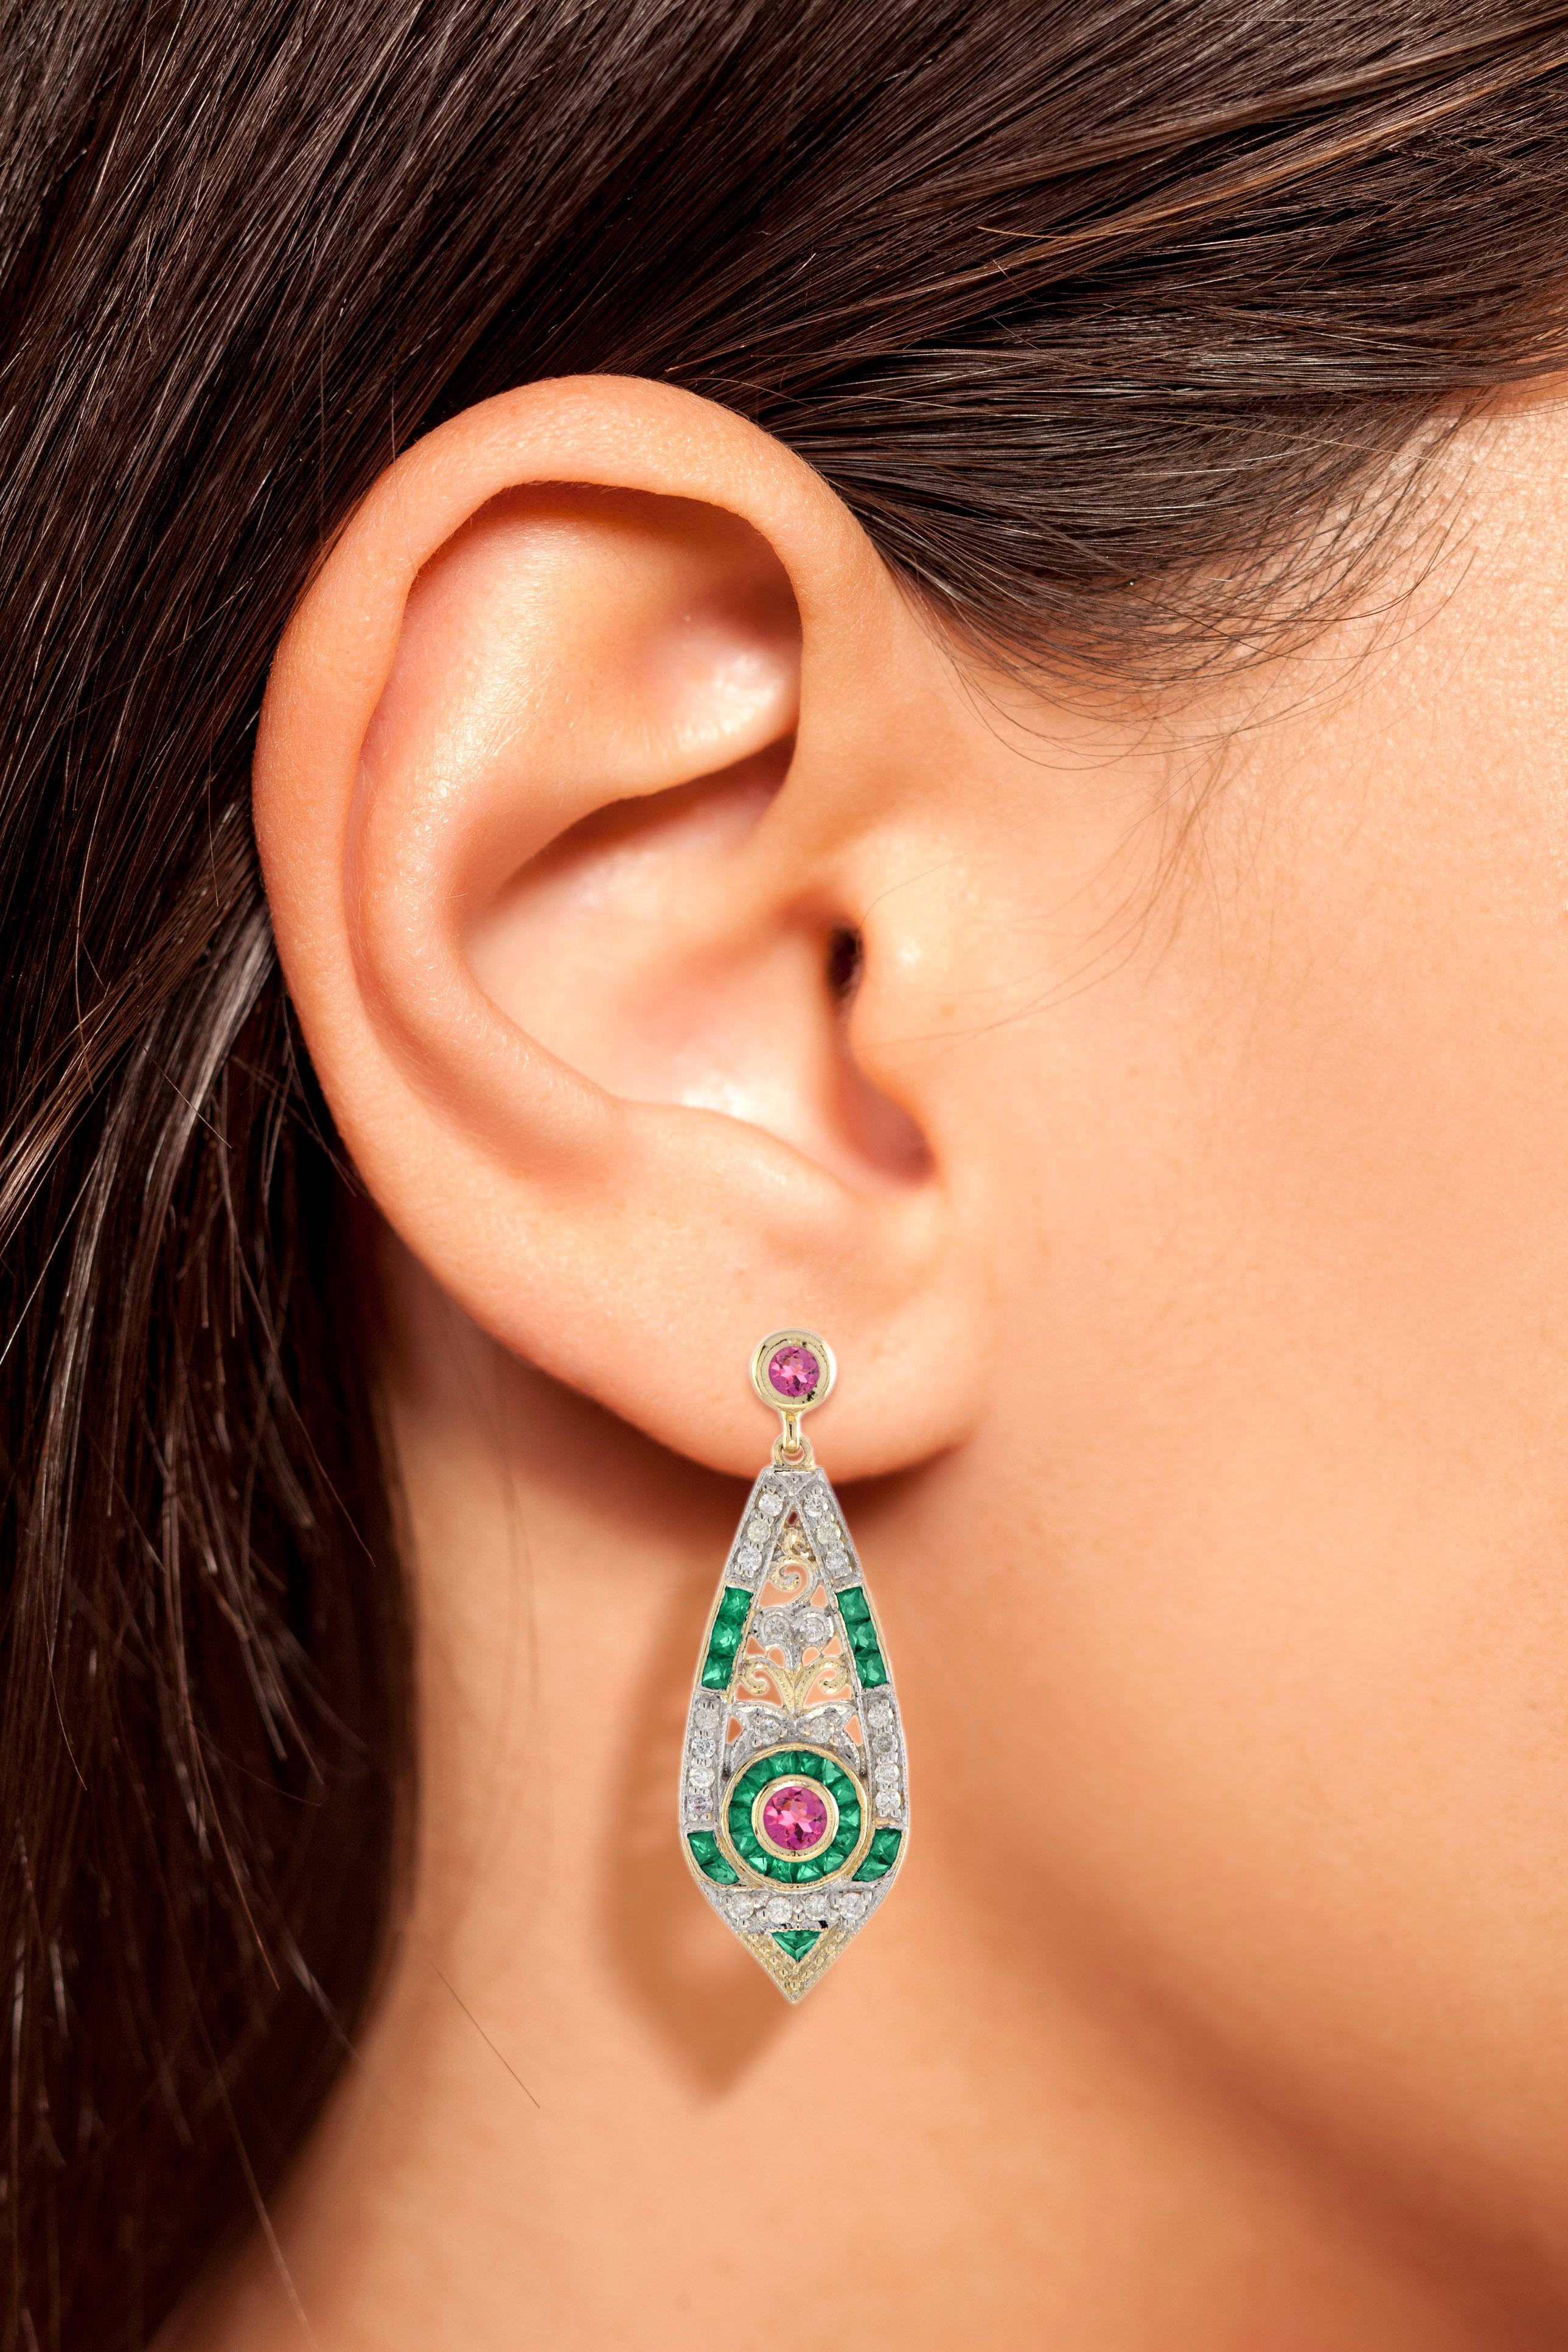 This is an exquisite pair of opal drop earrings with Art Deco ear design. The earrings feature a geometric design which is set with pink tourmaline for their centers, surrounded by French cut emerald and lovely sparkling diamonds, all set on 14k